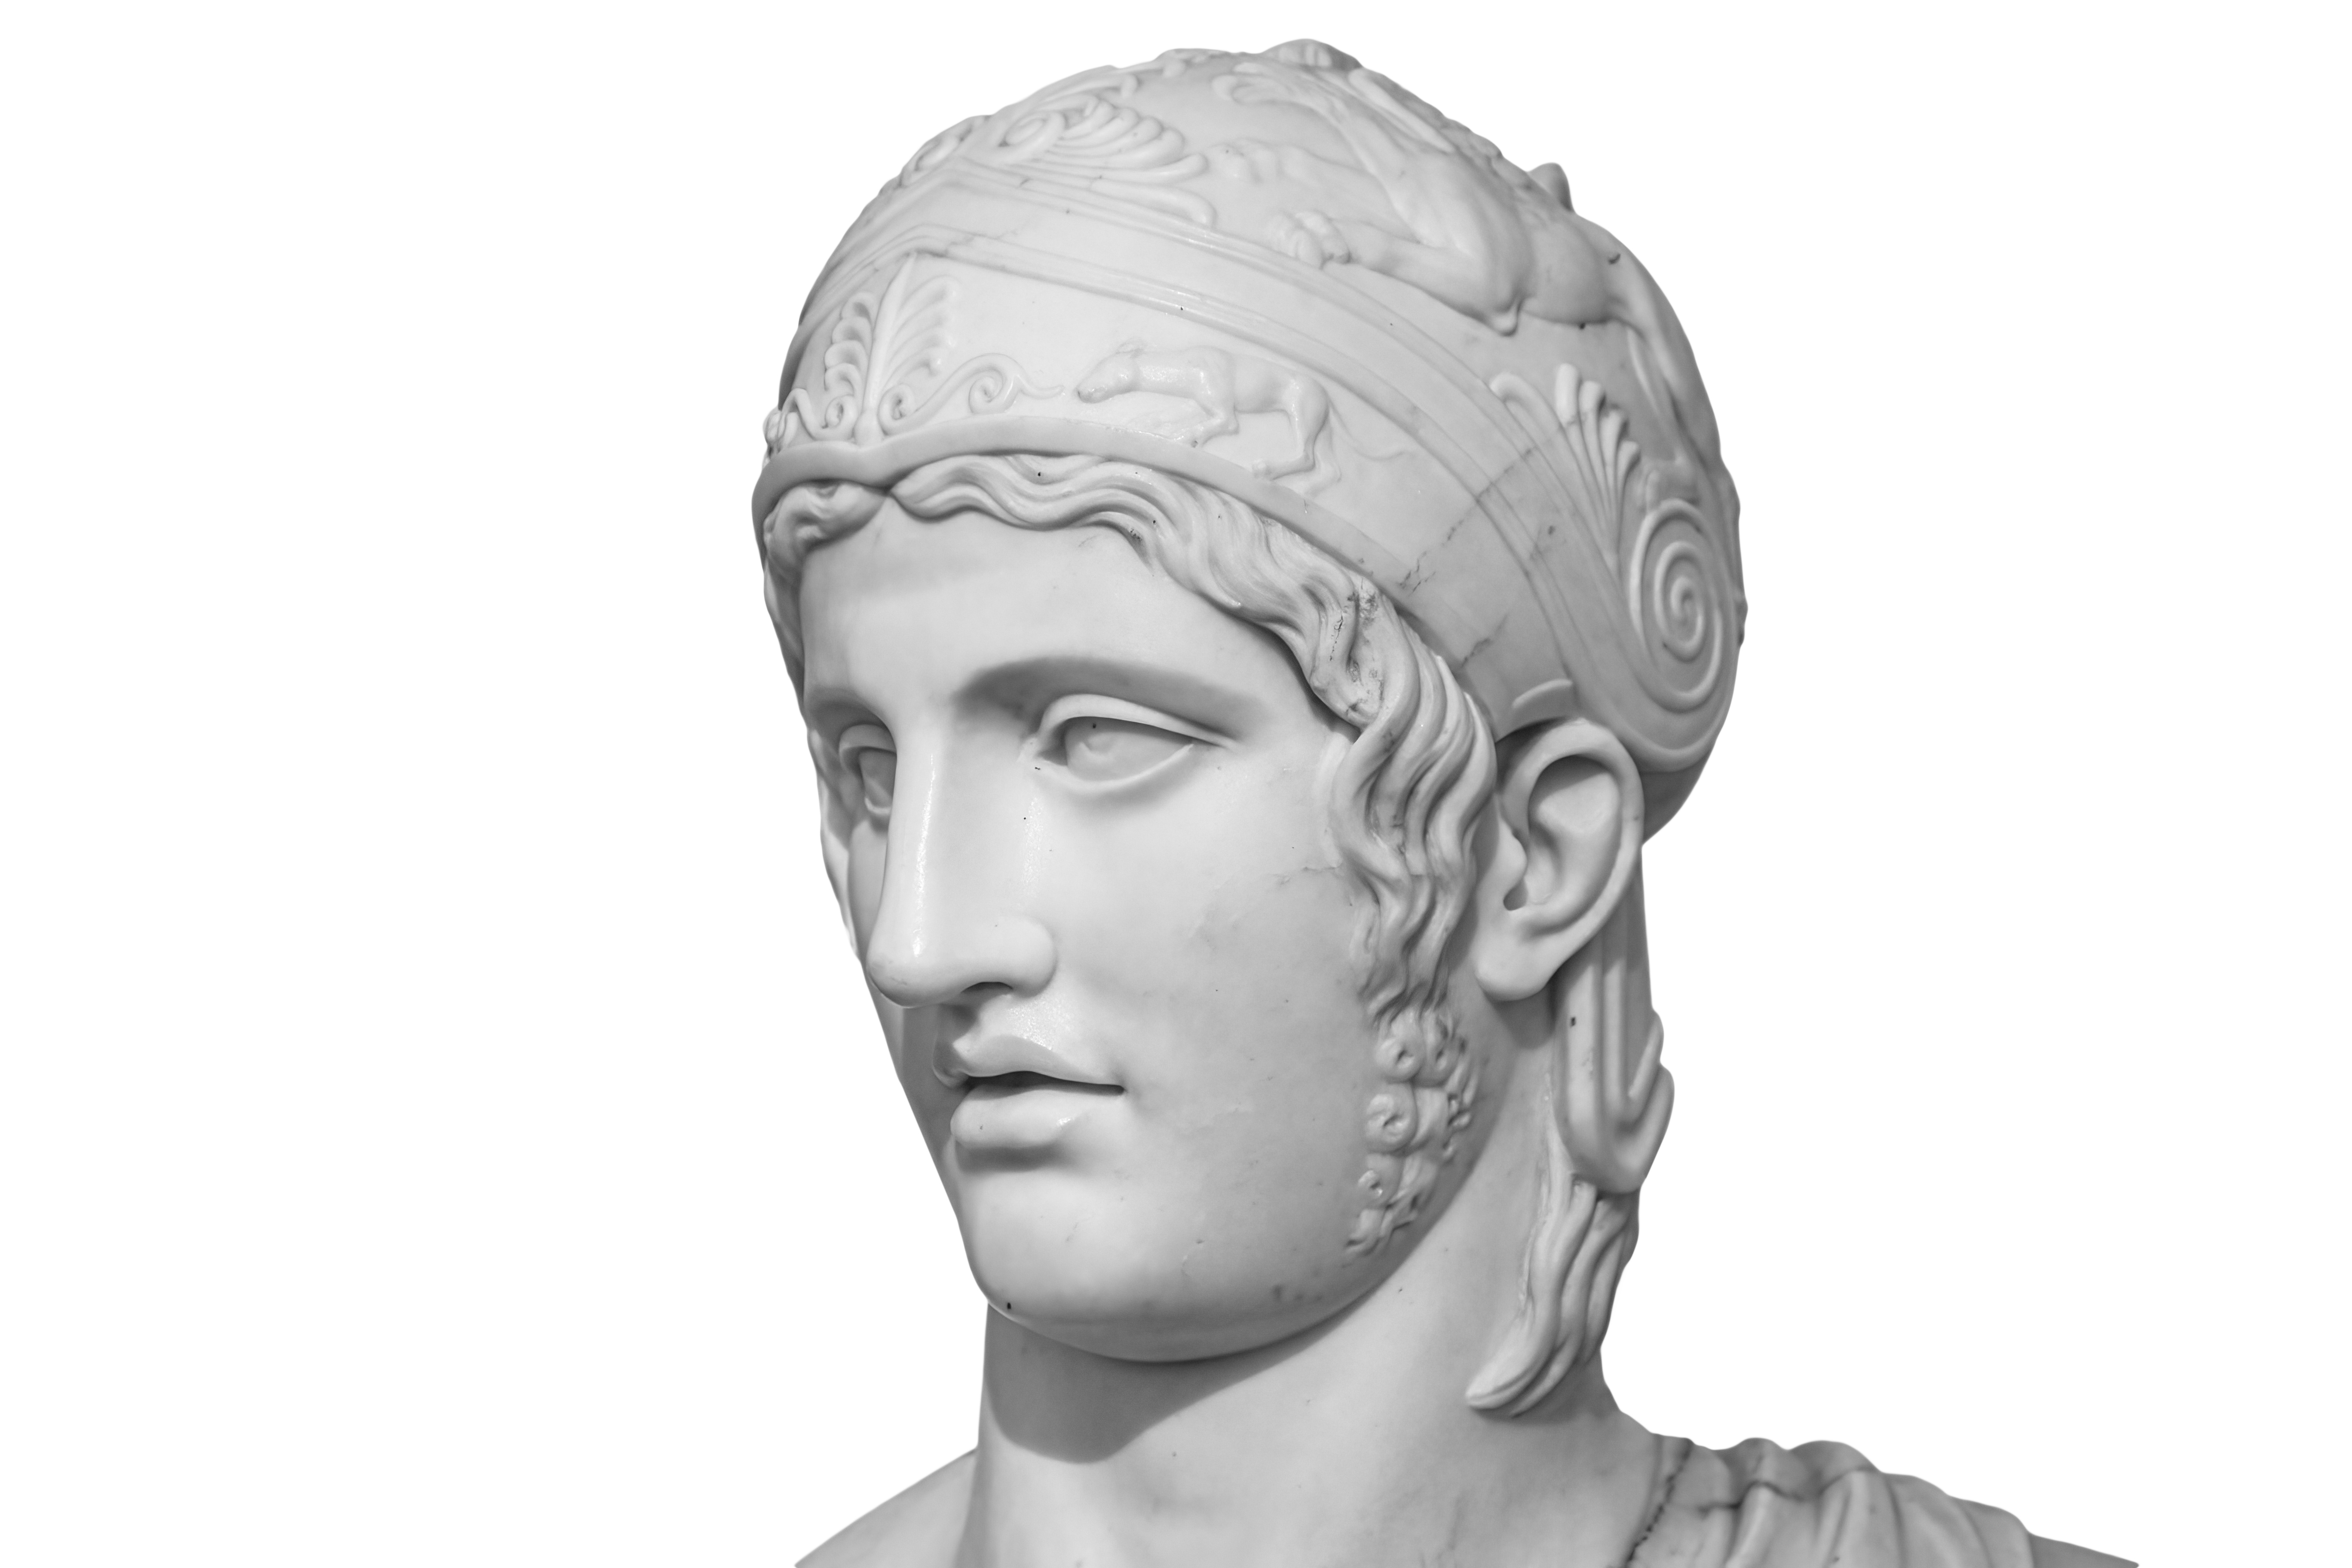 Image of the head of a state of Ares on a white background